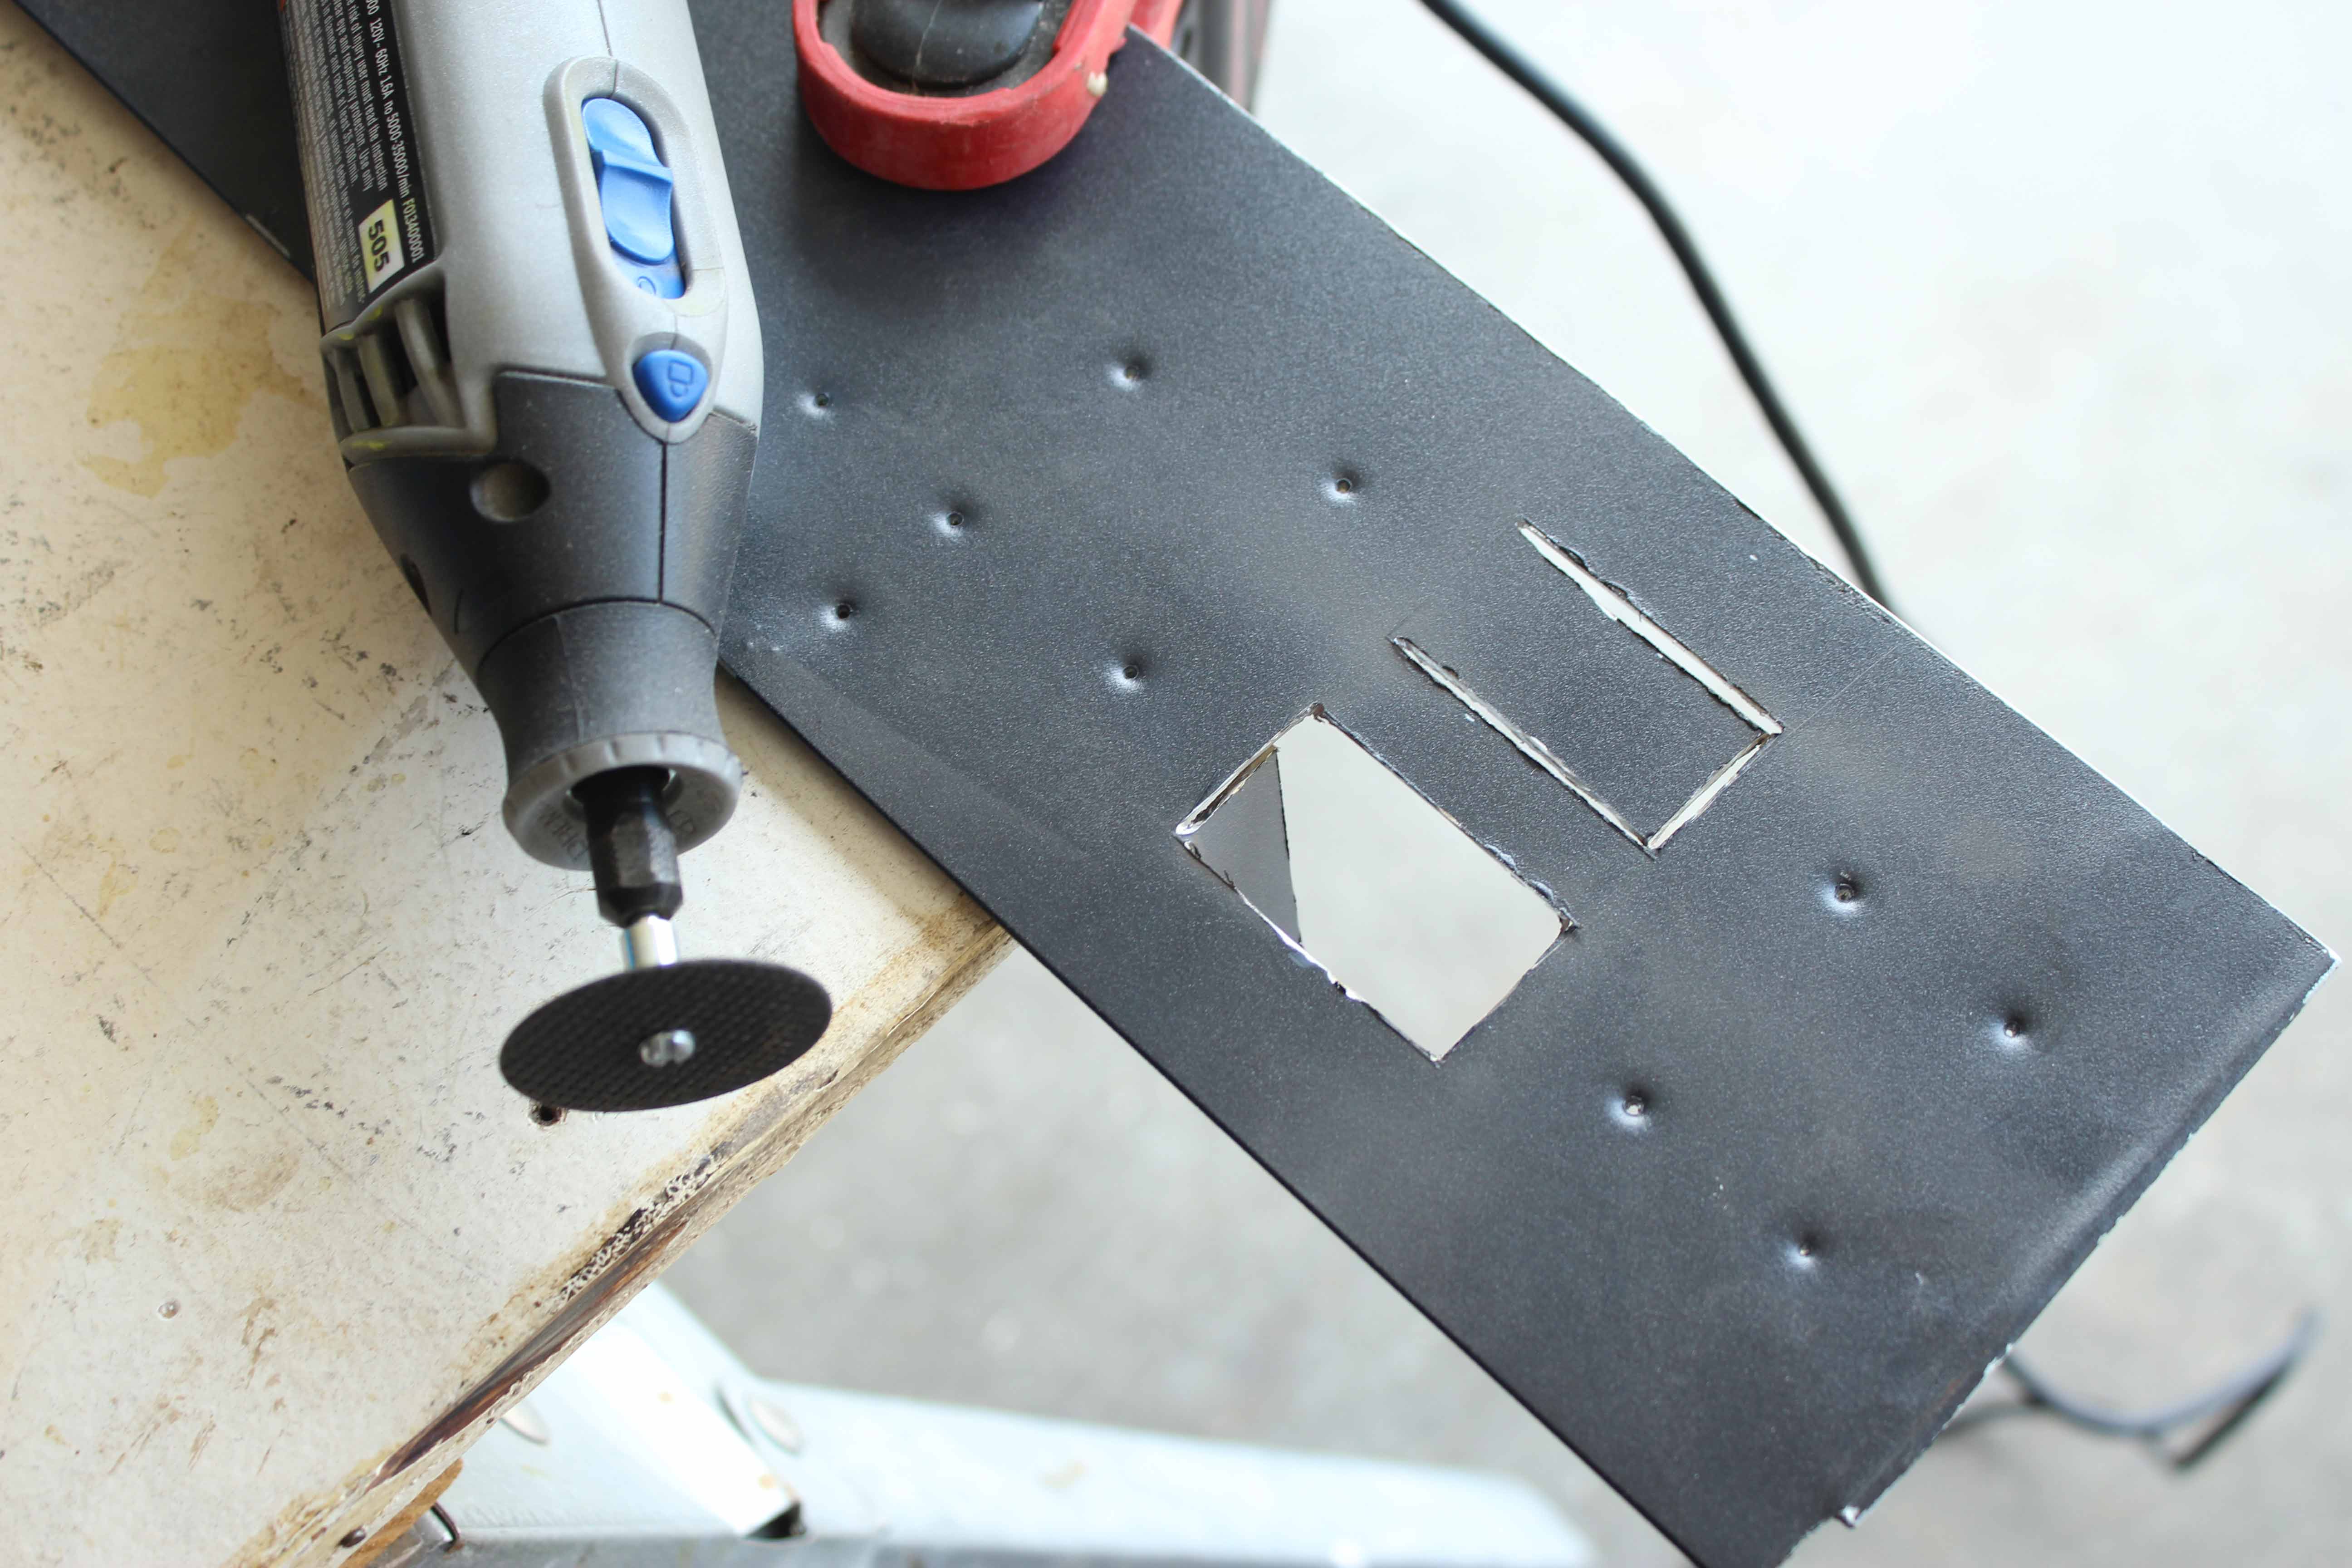 Using a dremel to cut the square holes for manufacturing an ATX power supply